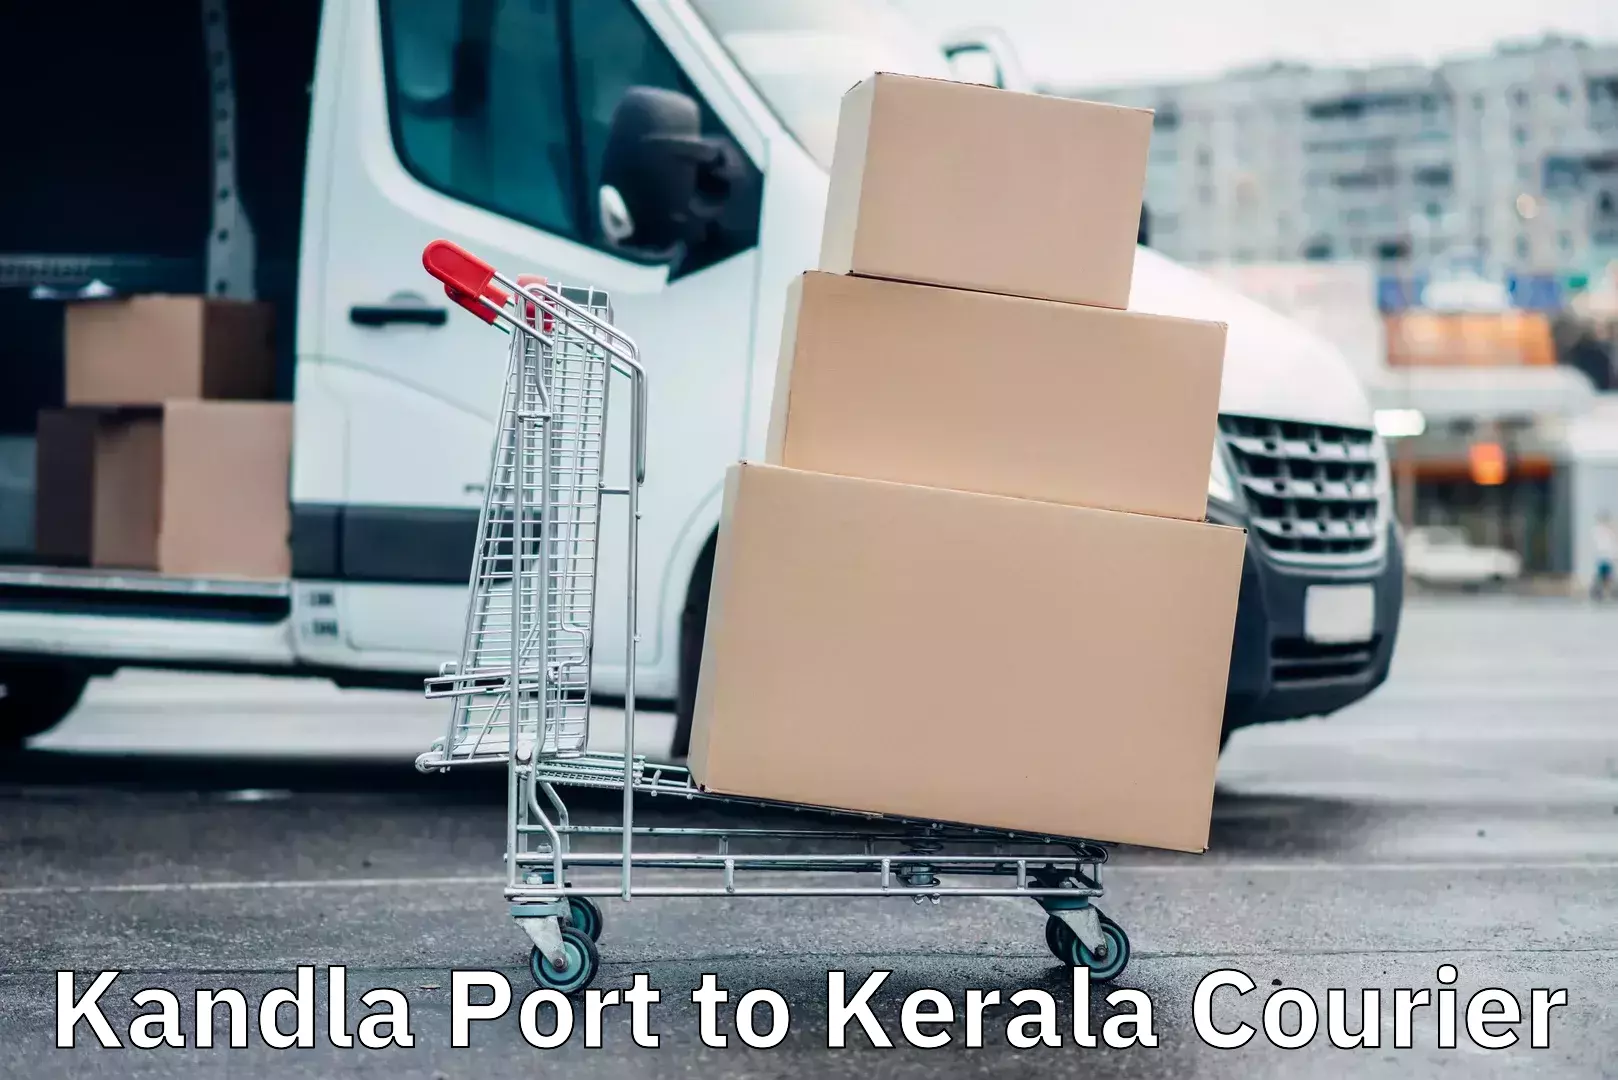 End-to-end delivery Kandla Port to Cochin Port Kochi